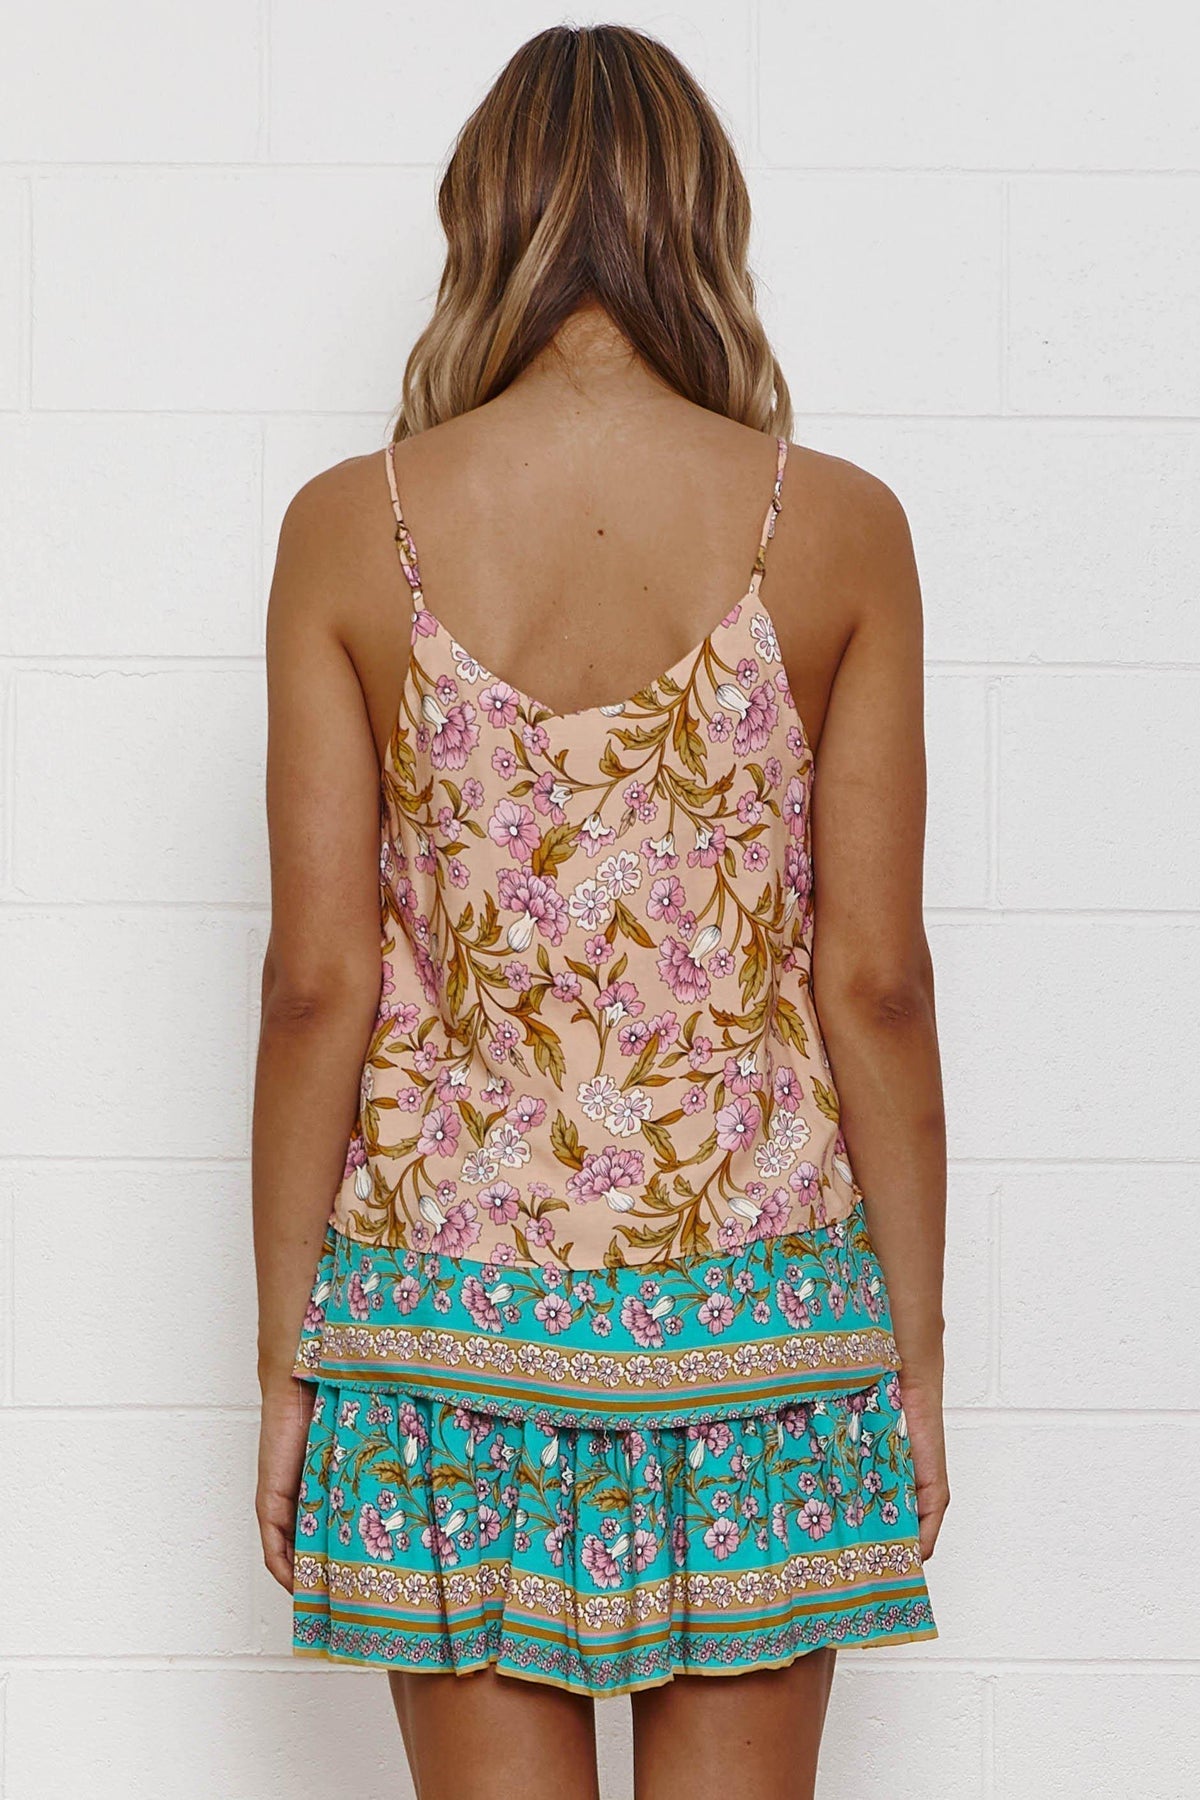 Sunday Session Top, BLUE, FLORAL, PINK, Sale, TOPS, Our New Sunday Session Top Is Now Only $39.25 Exclusive At Mishkah, Our New Sunday Session Top is now only $39.25-We Have The Latest Women&#39;s Tops @ Mishkah Online Fashion Boutique-MISHKAH